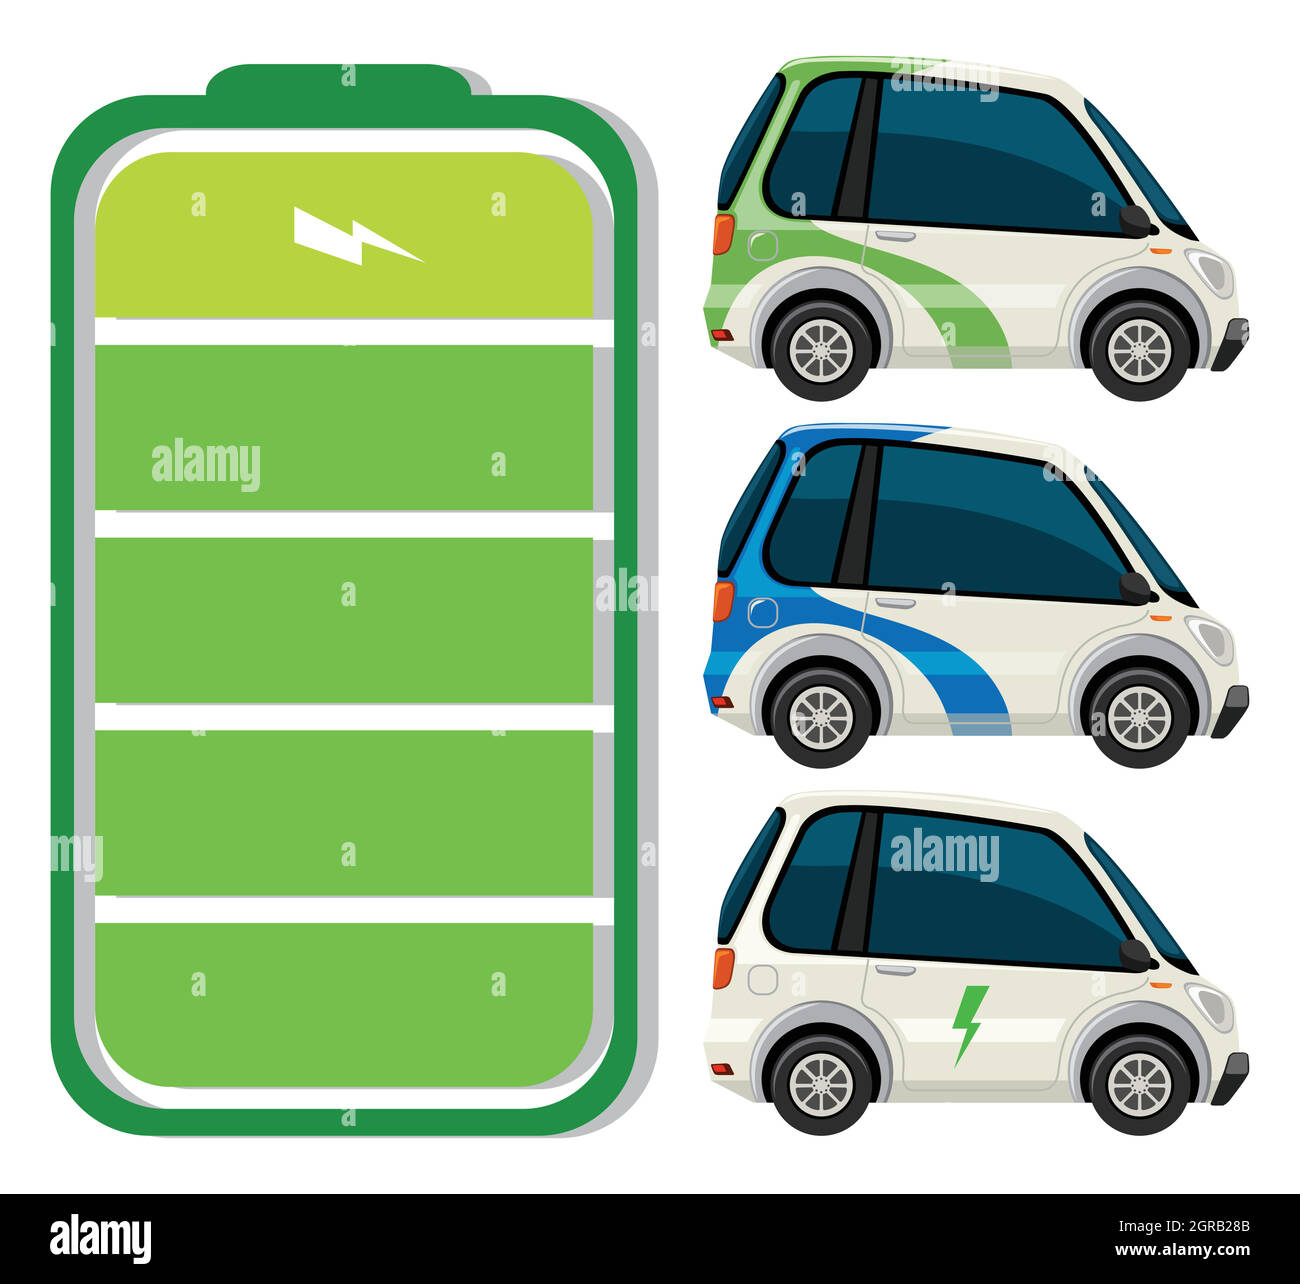 Set of electric car Stock Vector